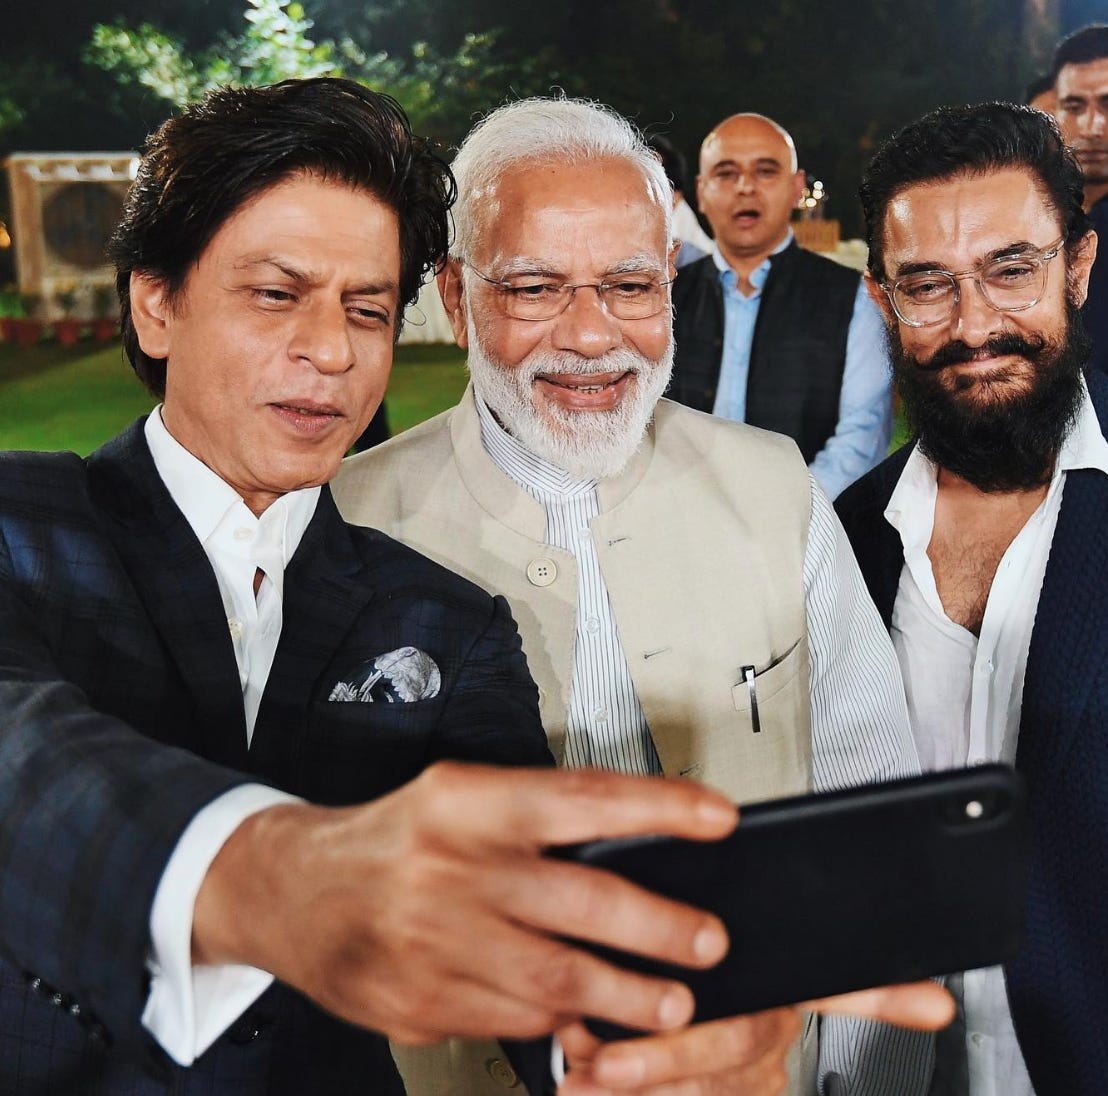 Shah Rukh Khan and Aamir Khan take a selfie with Prime Minister Narendra Modi in Oct. 2019. Photo: Instagram/narendramodi